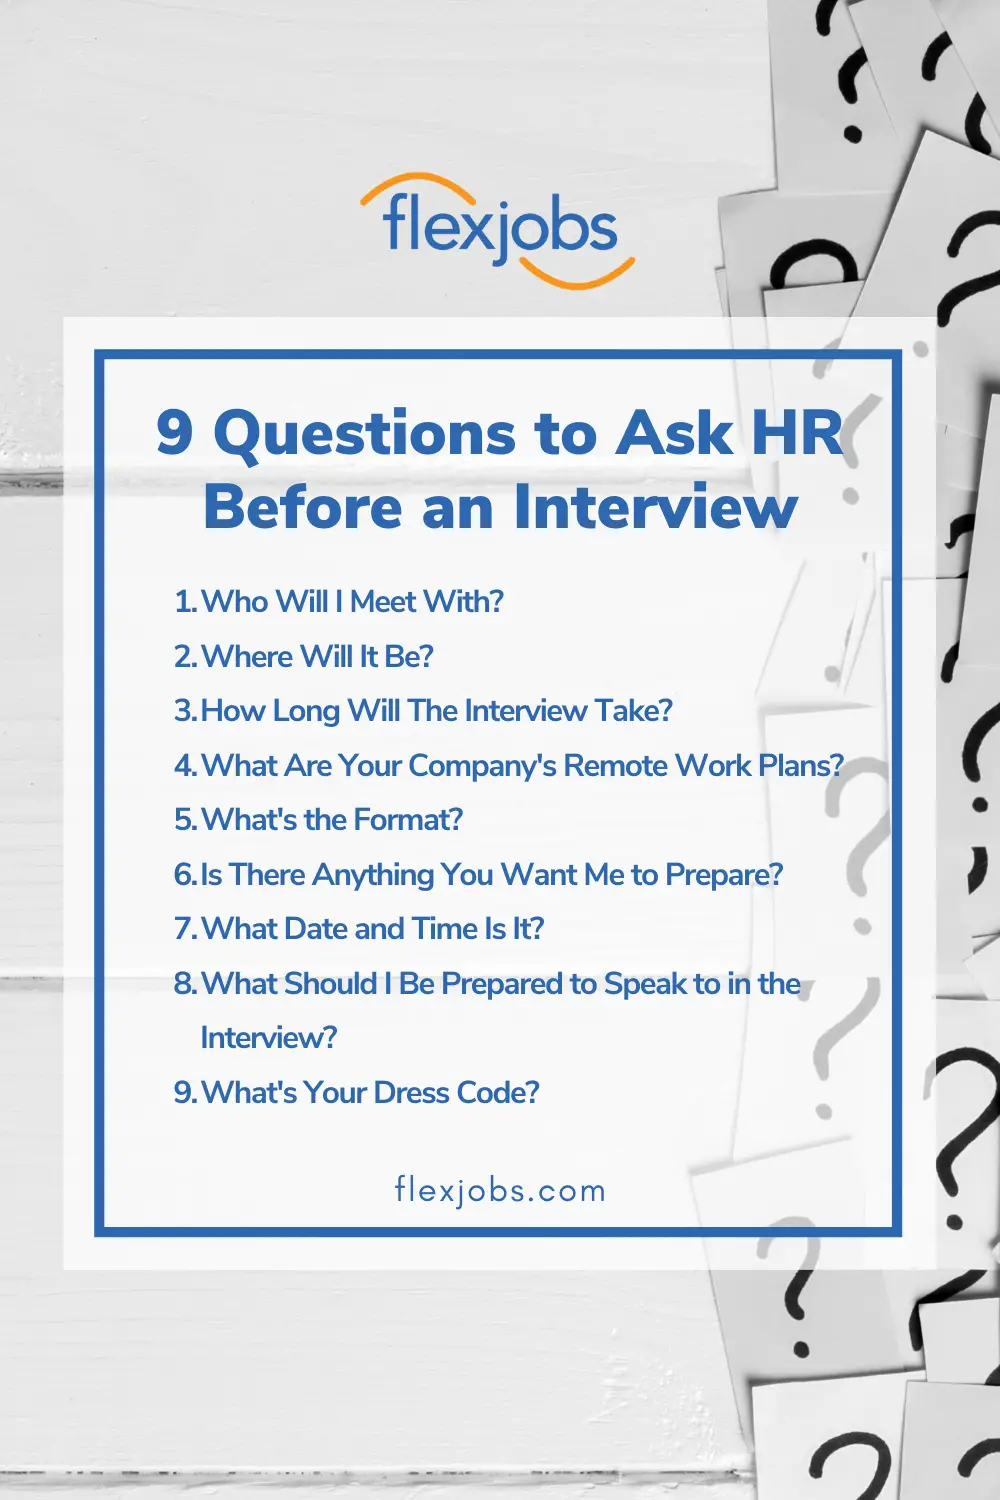 9 Questions to Ask HR Before an Interview